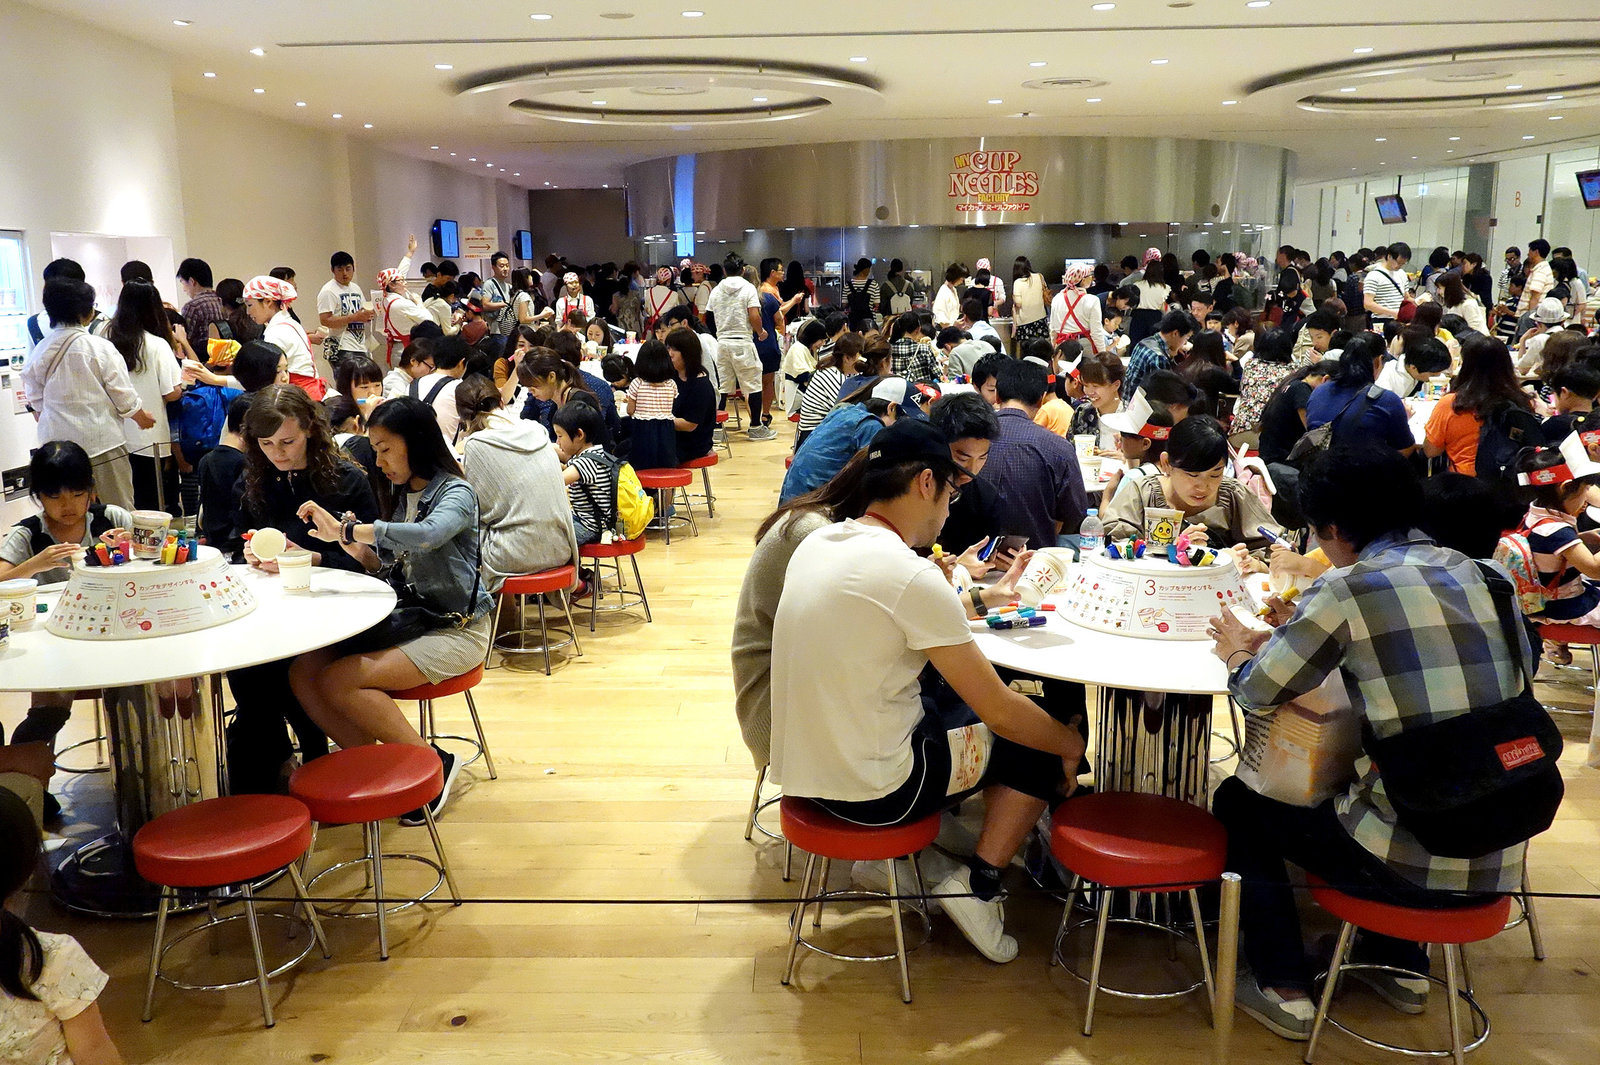 Crowds fill the Cup Noodles Museum in Yokohama, Japan, to decorate their own branded cups before creating personal noodle flavor blends.